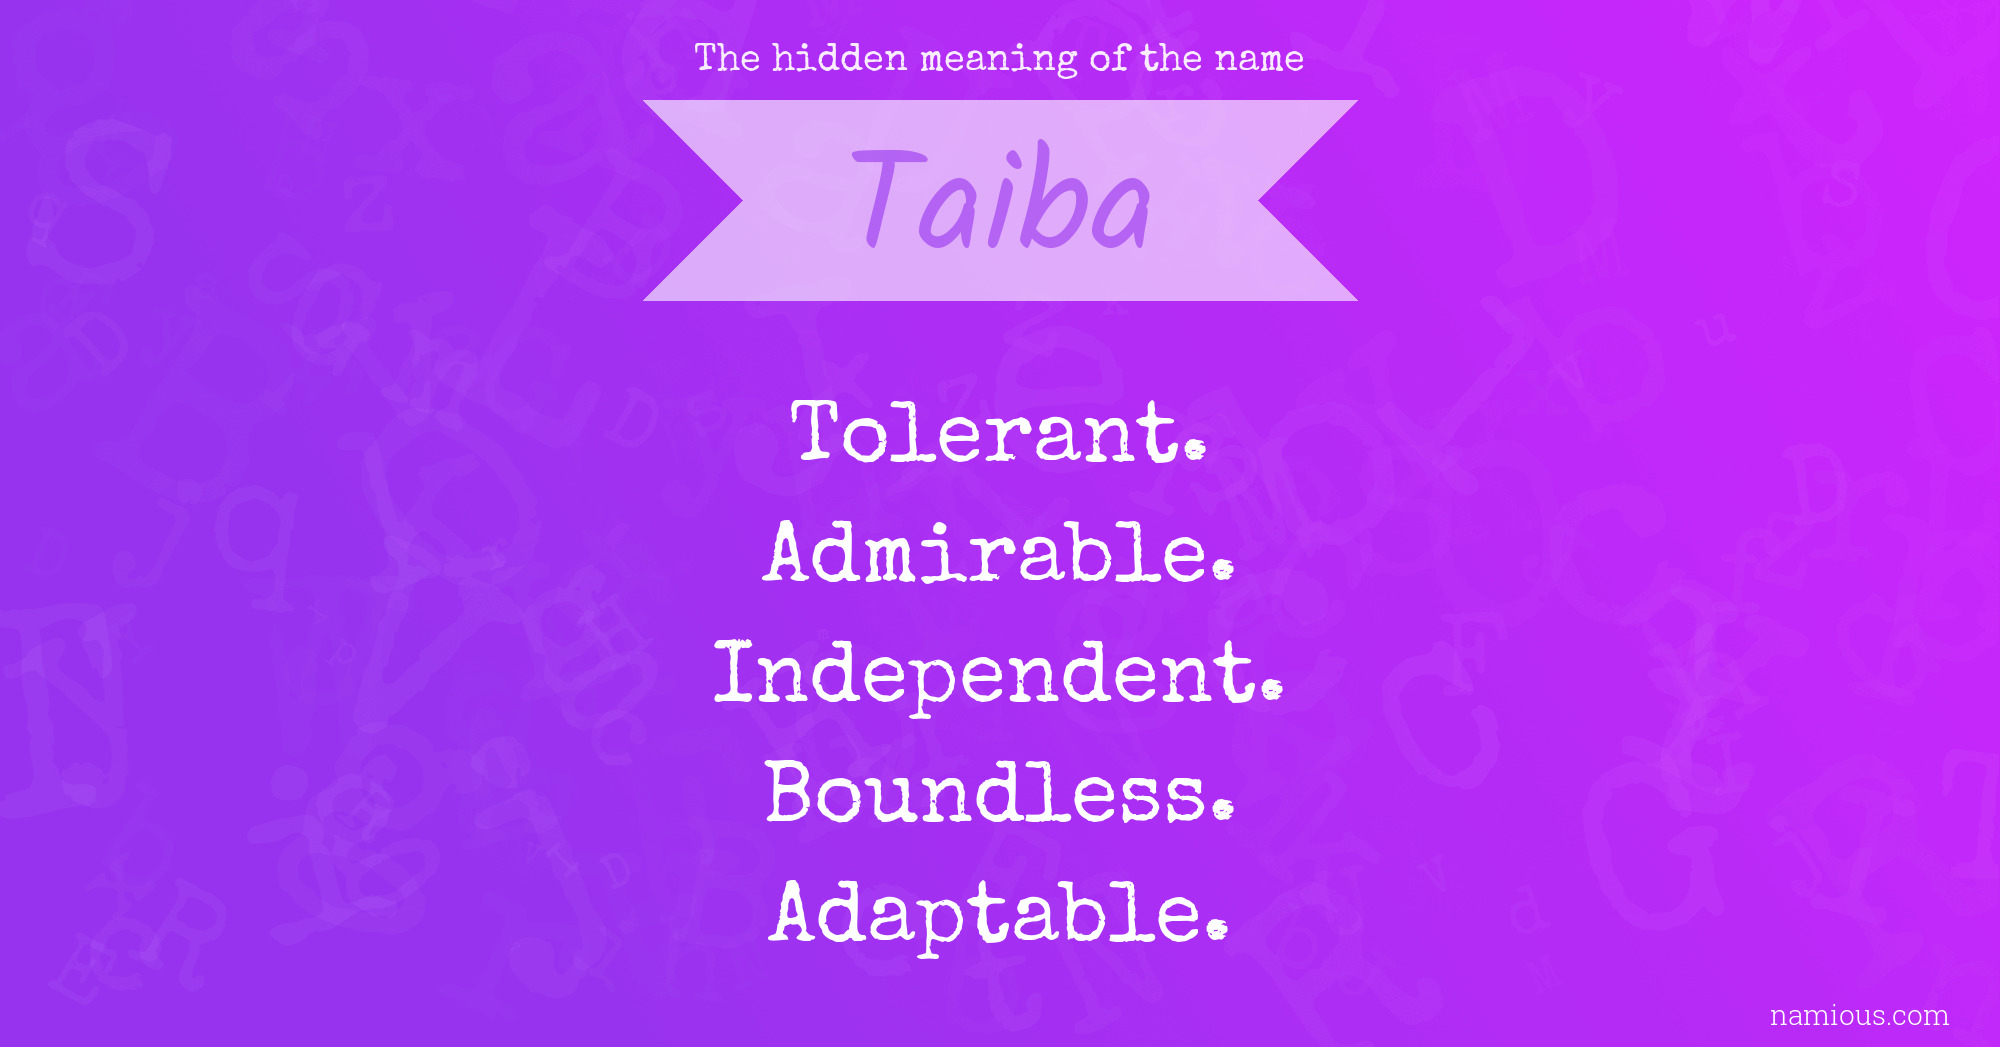 The hidden meaning of the name Taiba